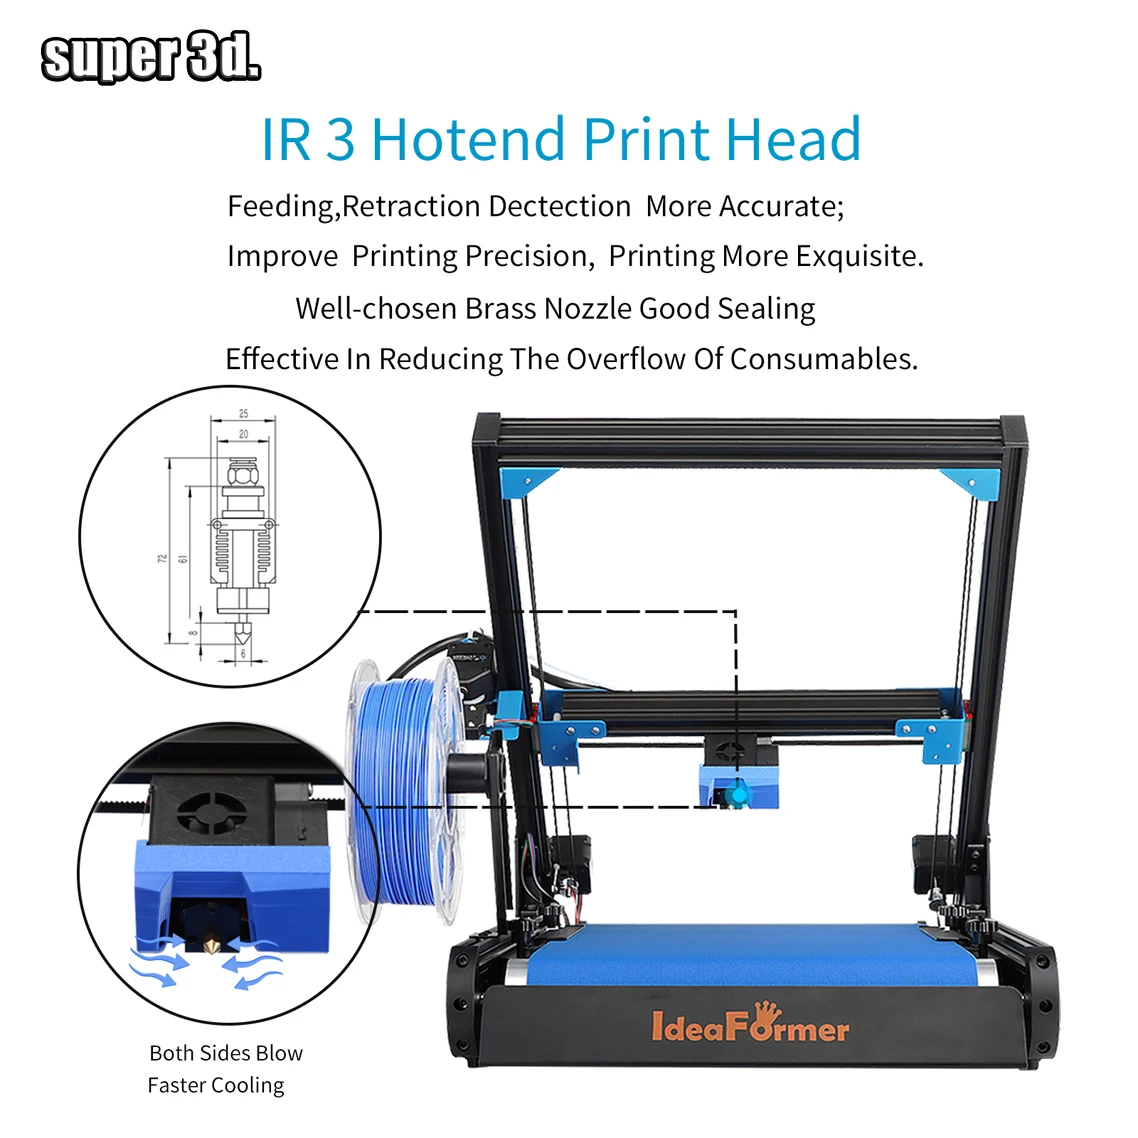 Portrait Style 3D Printer 3D Printers Computer ships-from: China|France|Germany|Poland|SPAIN